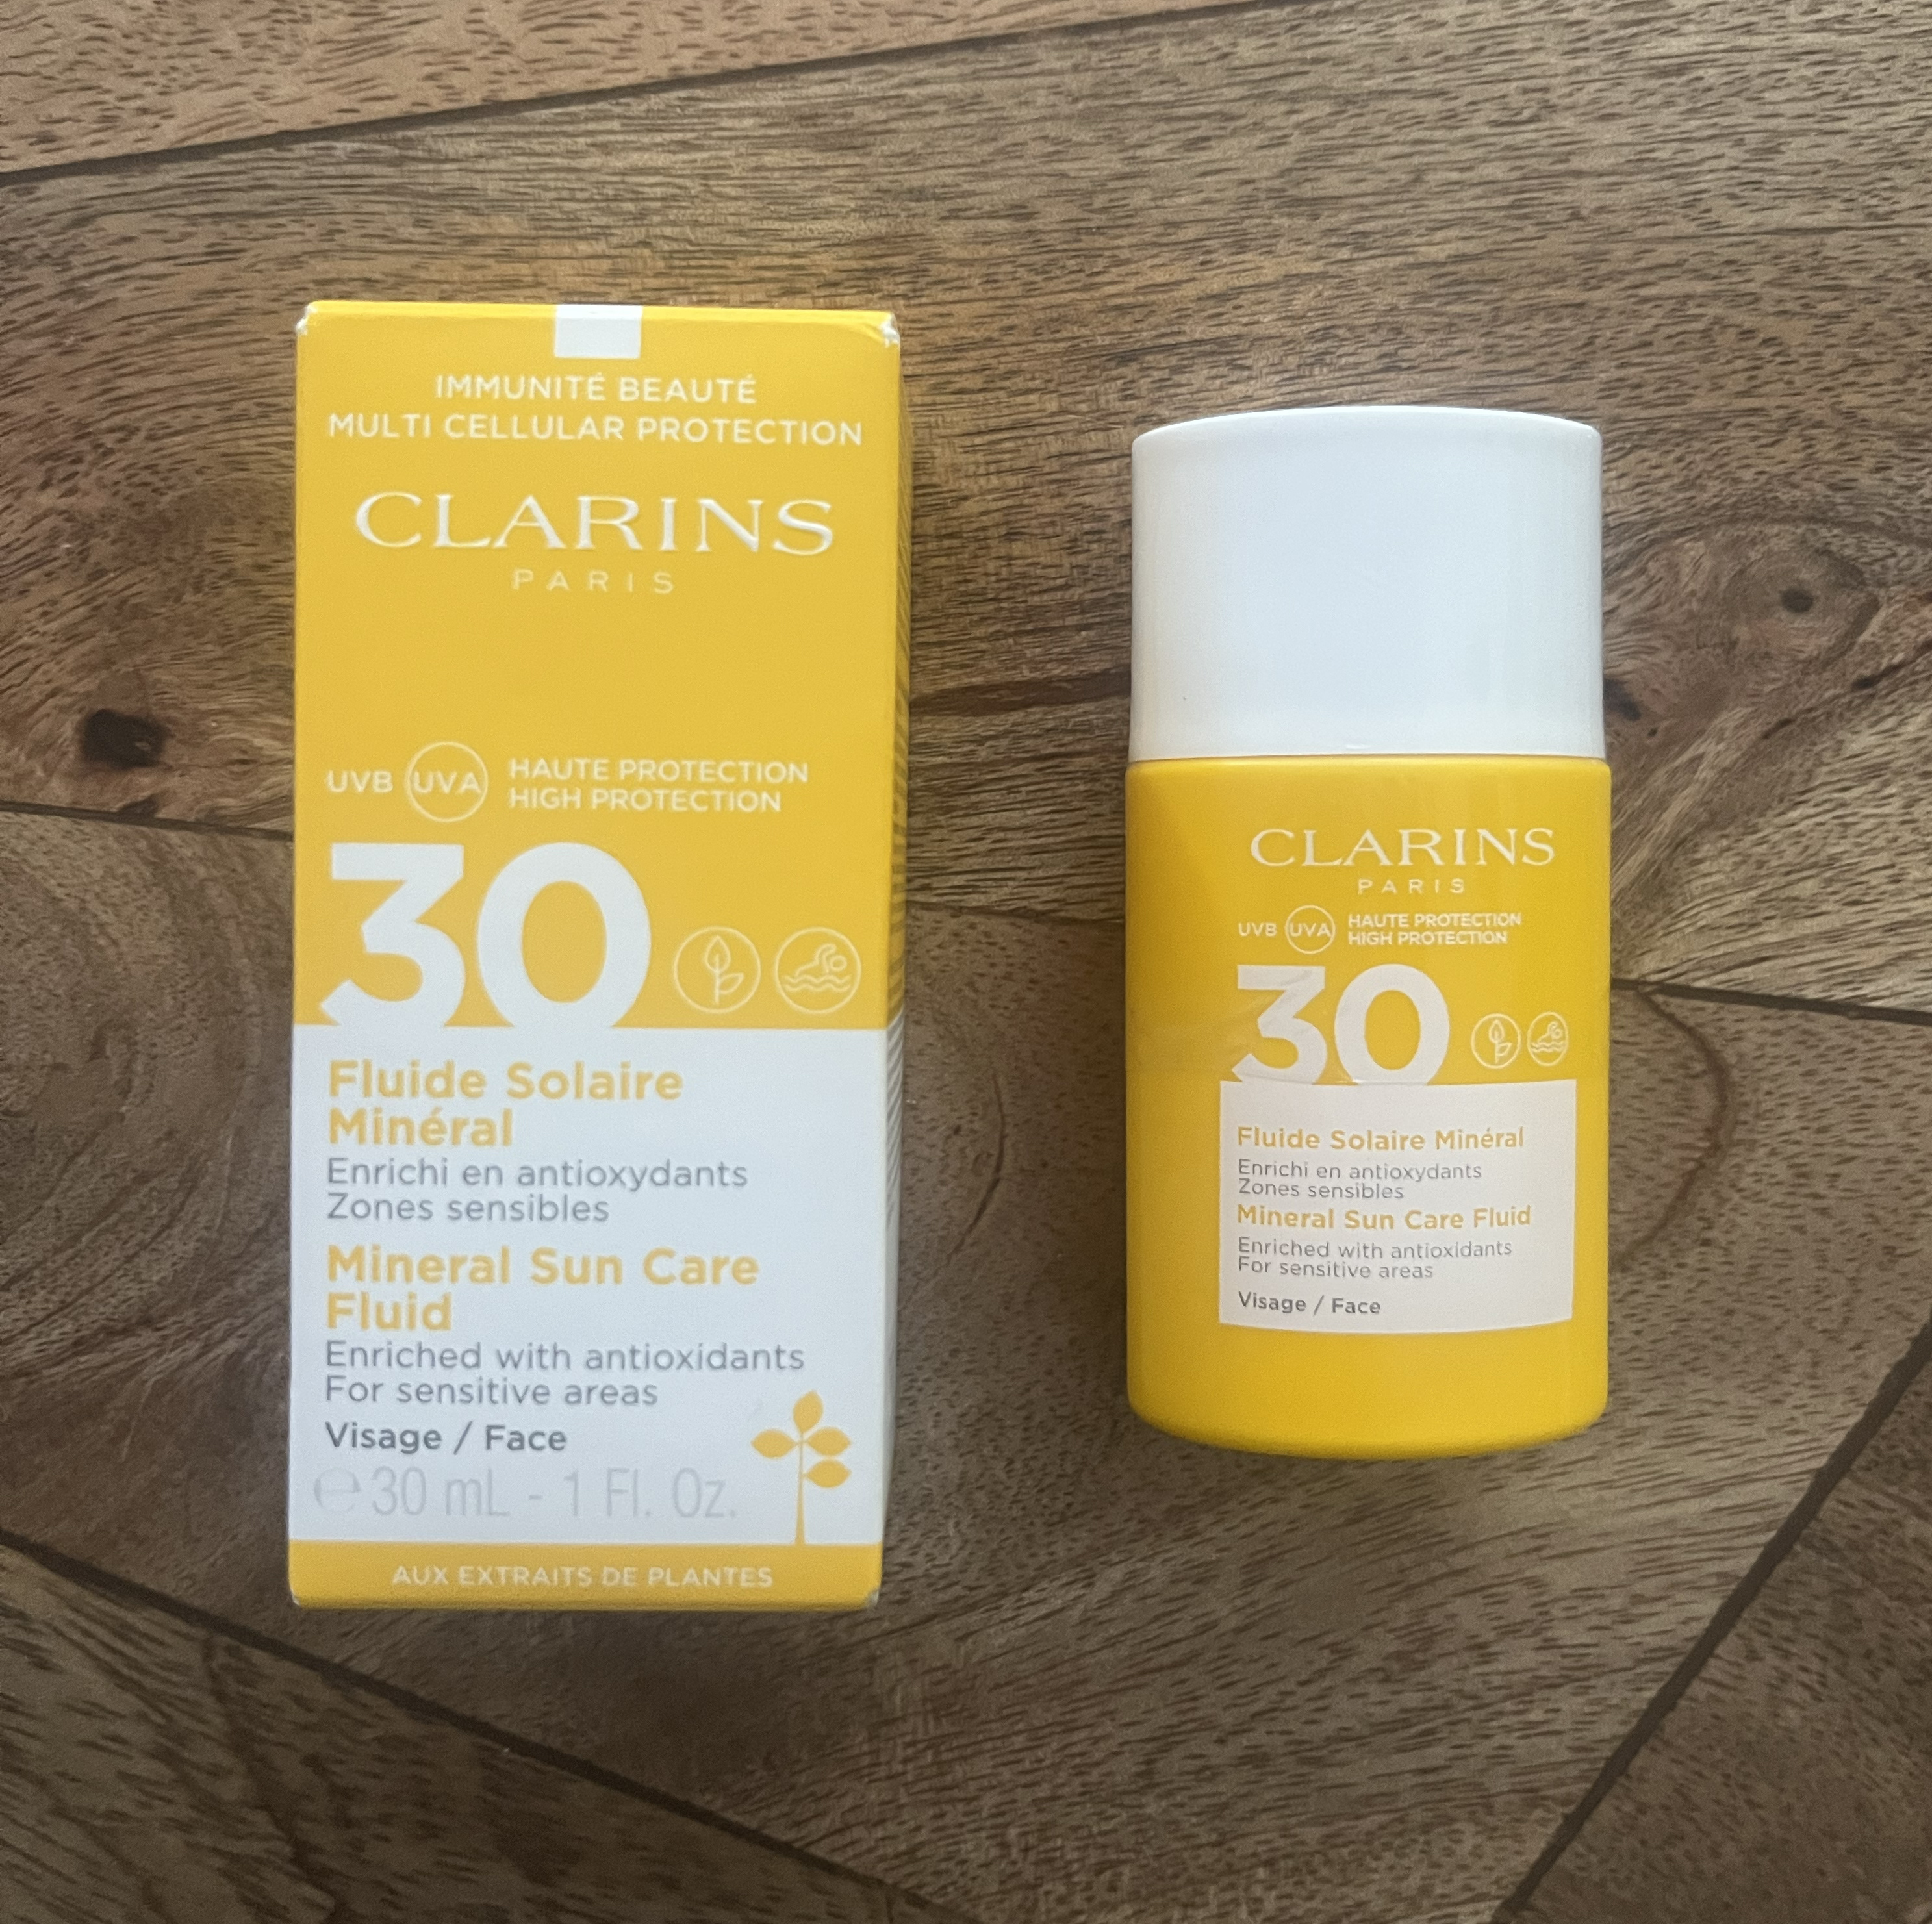 Clarins Mineral Sun Care is ideal to take on holiday.